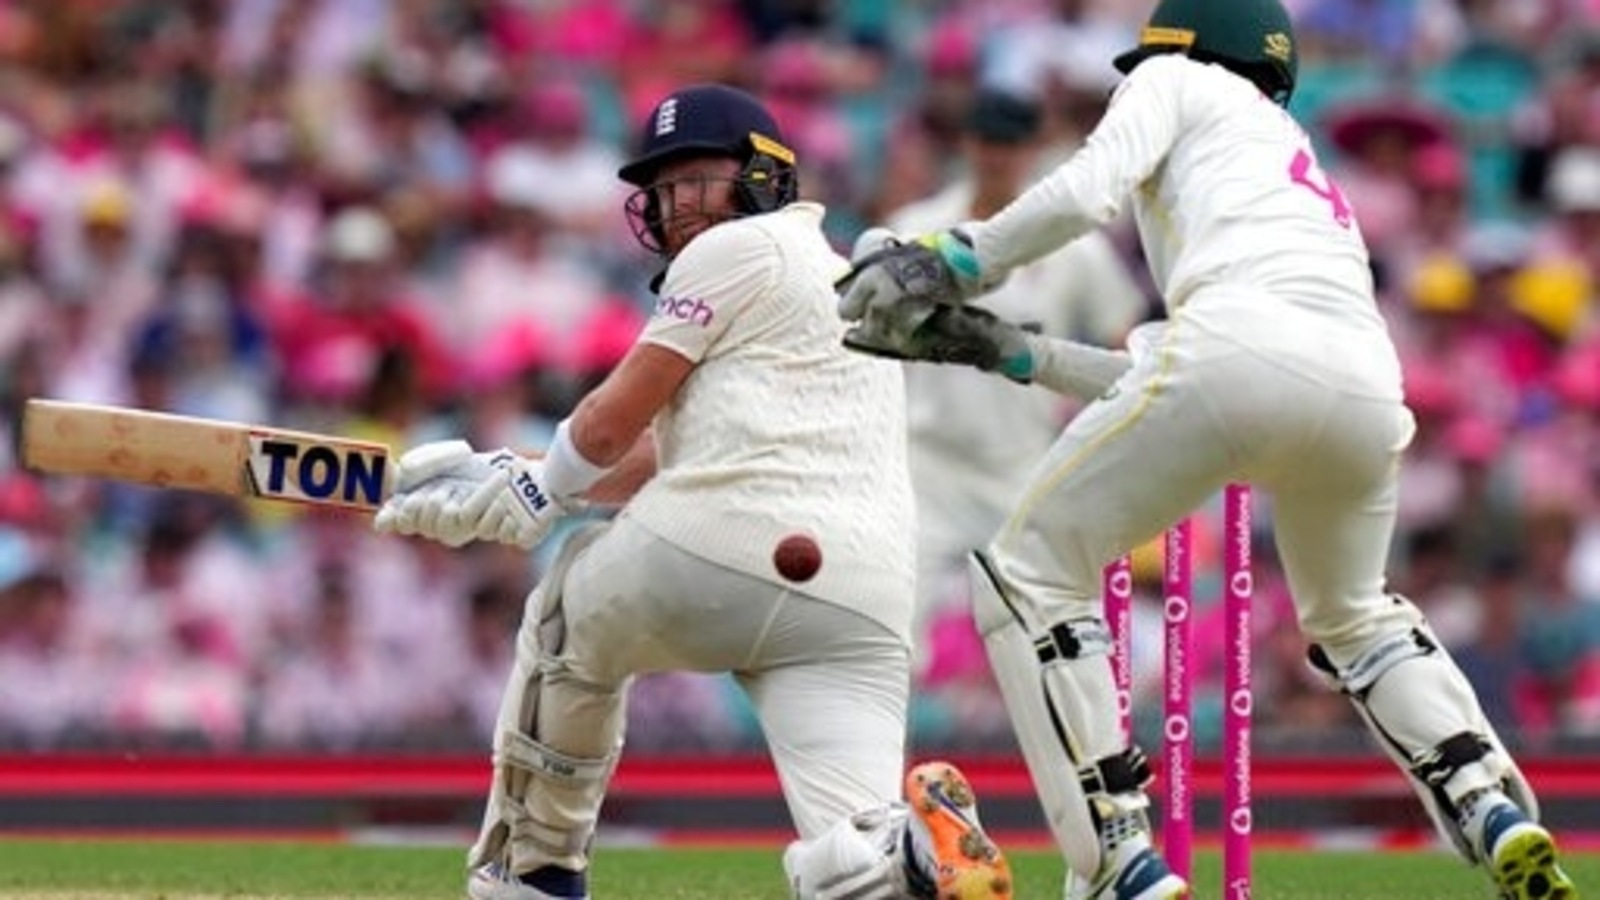 Ashes 4th Test Day 3 Highlights Bairstow leads fightback with